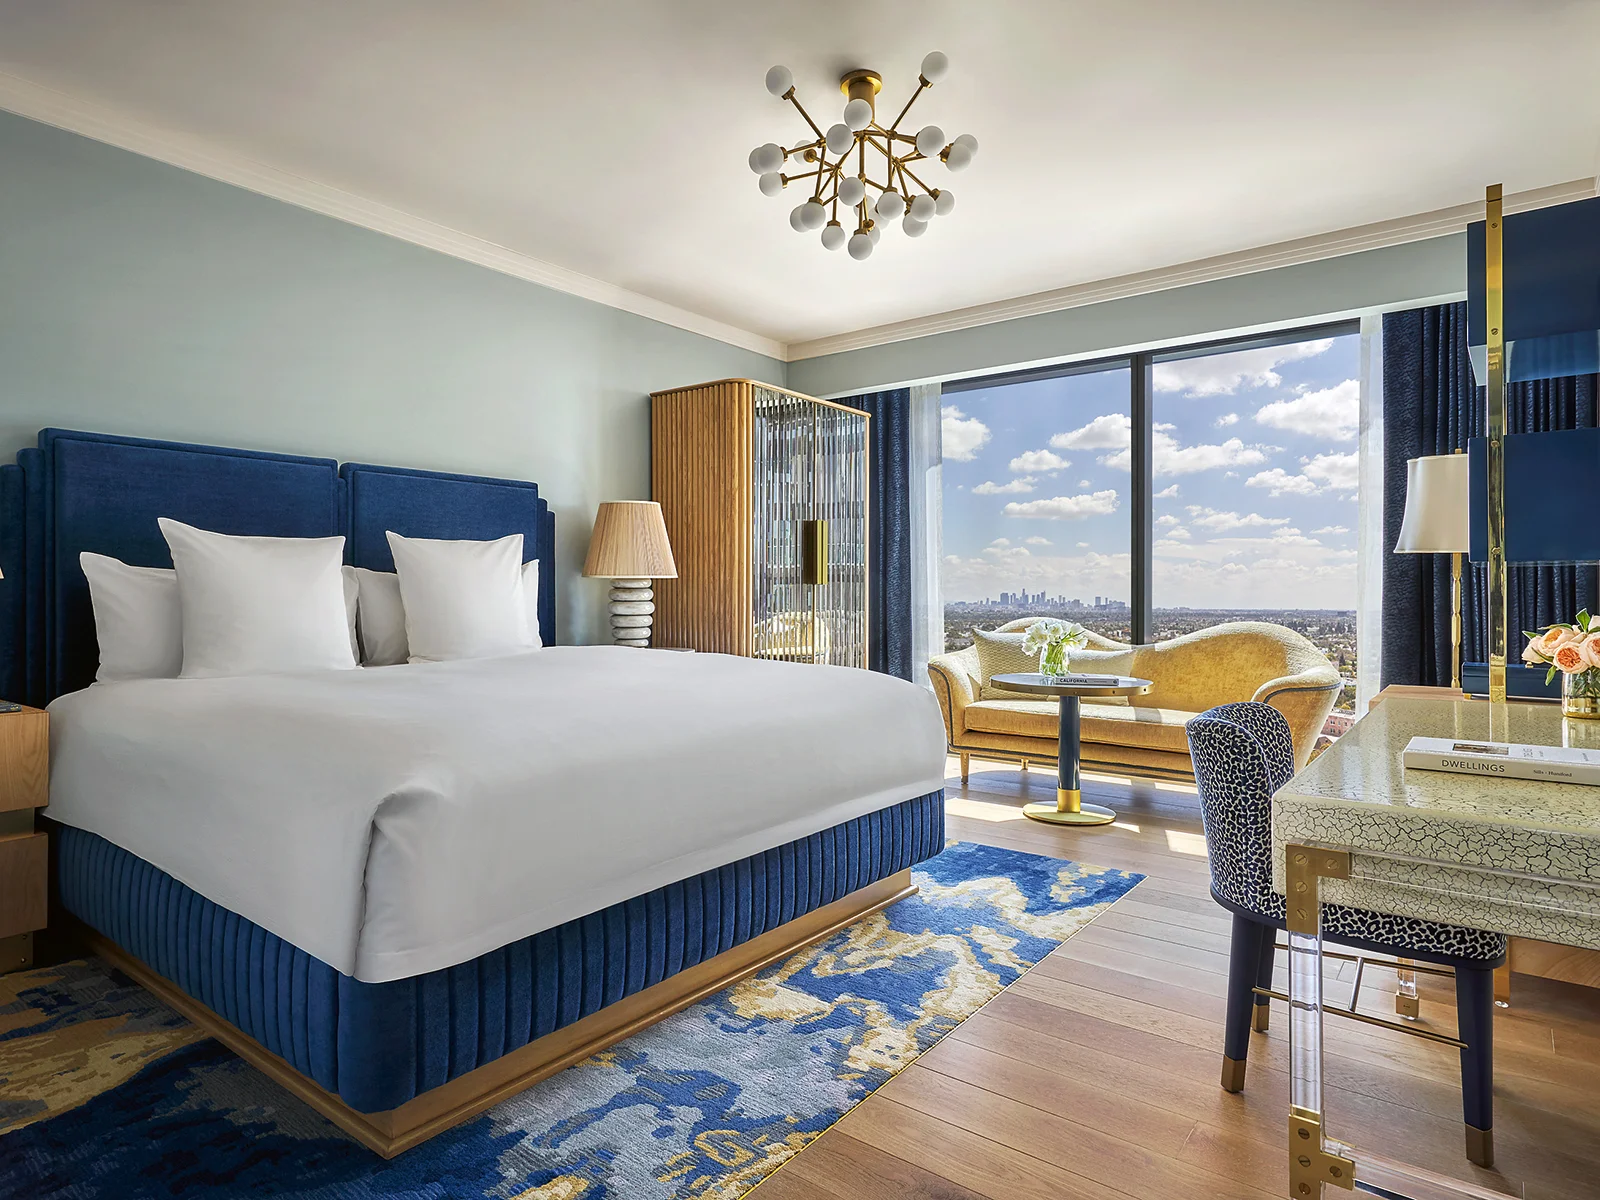 Hotel room with a blue bedframe and white sheets, and a picture window over blue sky and white clouds